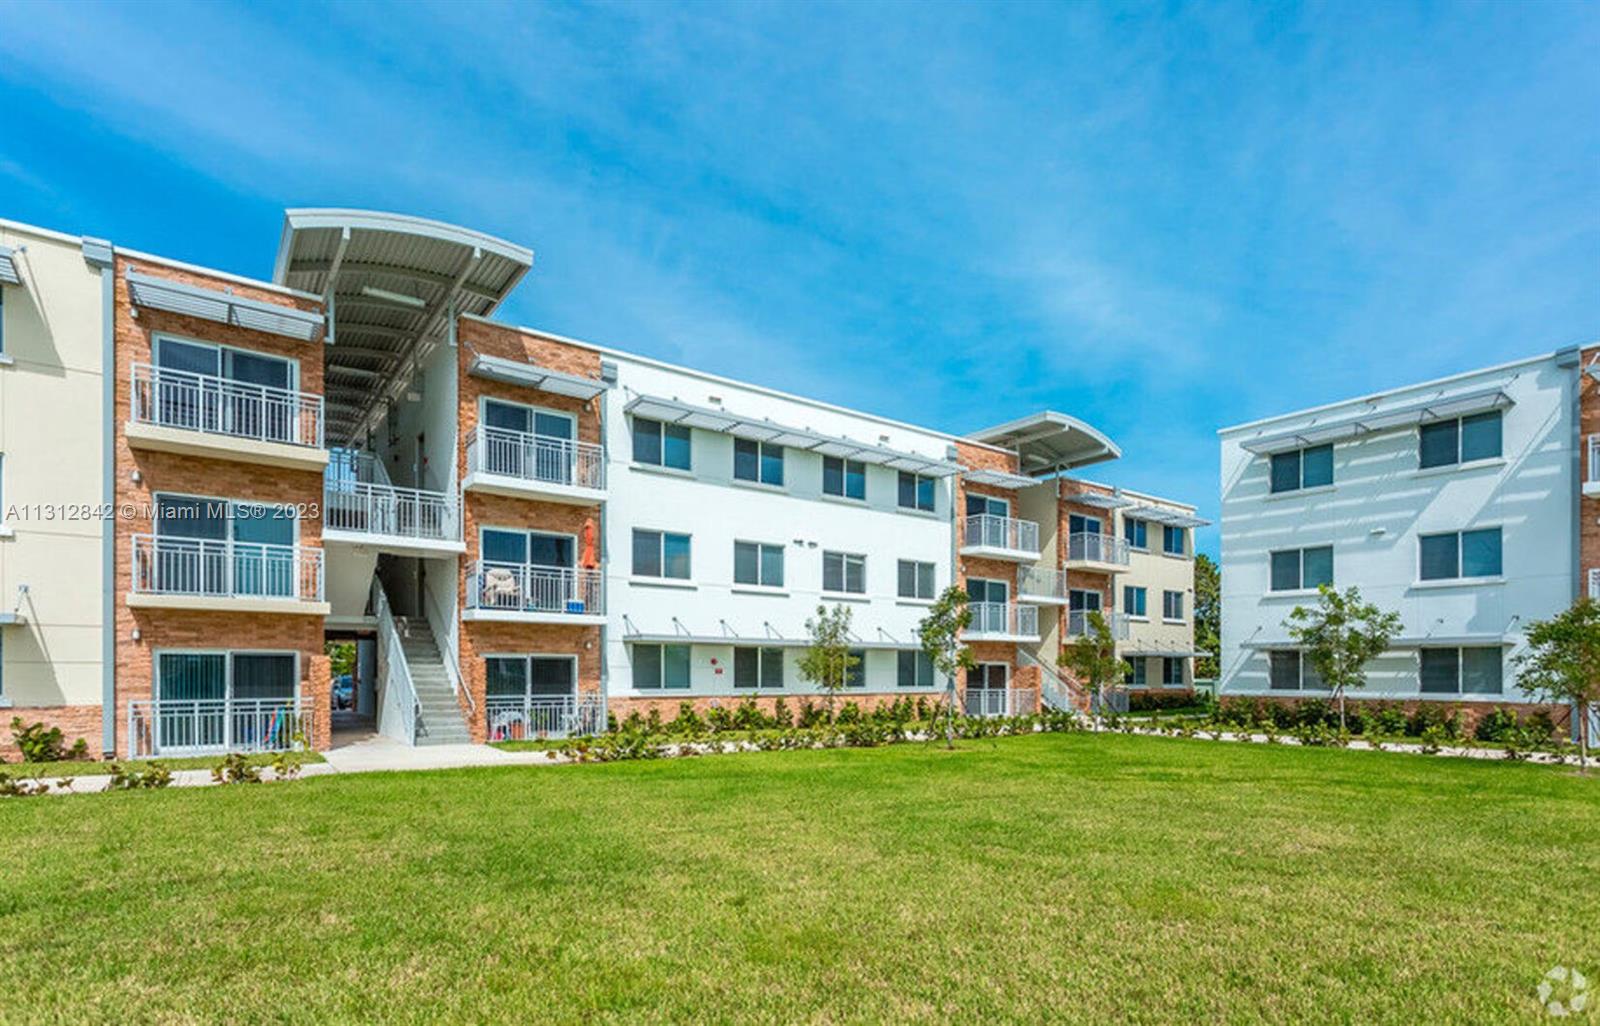 Modern Apartments just minutes from the highway. Multiple units available with 1, 2 & 3 bedrooms. Move in ready with rapid approval. Pet friendly community. 

Amenities include: 

24-Hour Emergency Maintenance
24-Hour Fitness Center
Children Play Area
Controlled Access
Multi-Purpose Clubhouse
Online Hassle Free Payments 
Swimming Pool & More!